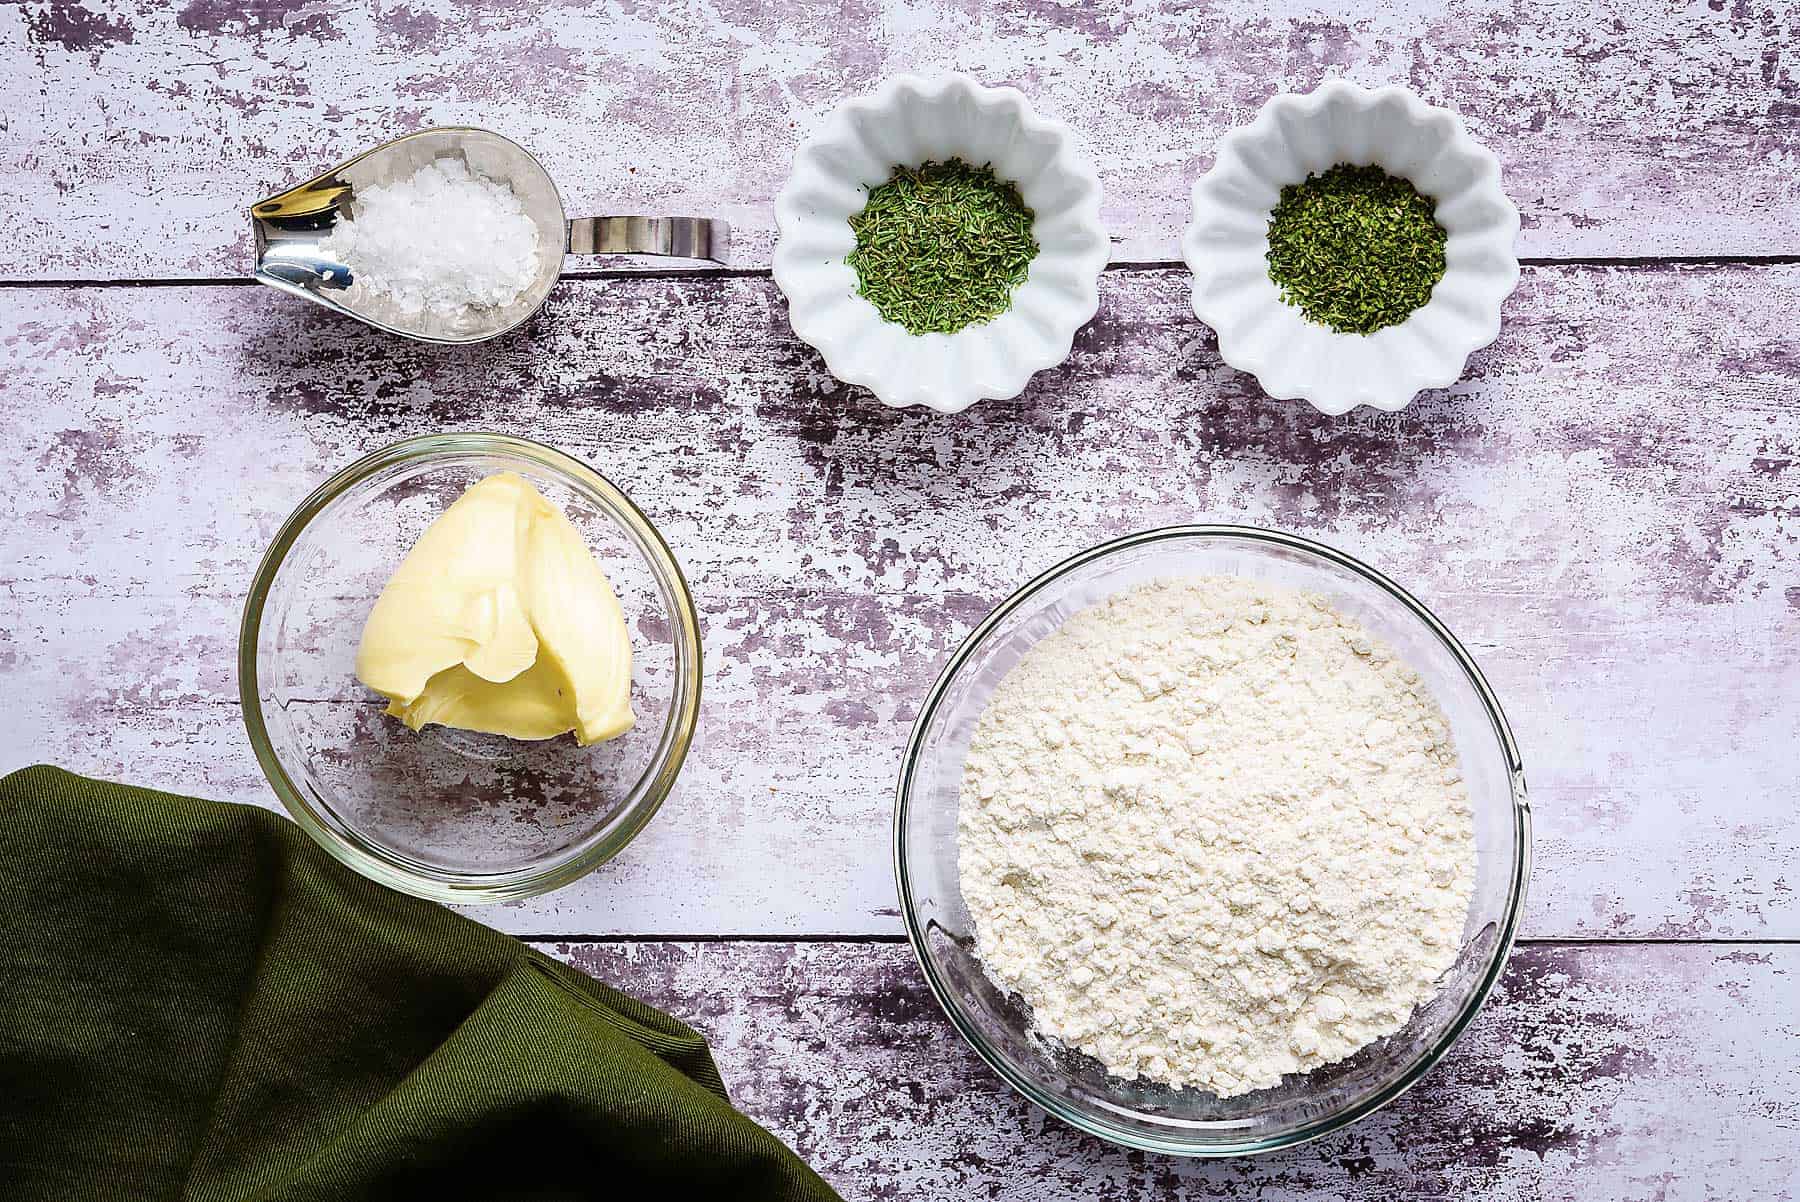 Ingredients for herbed dough